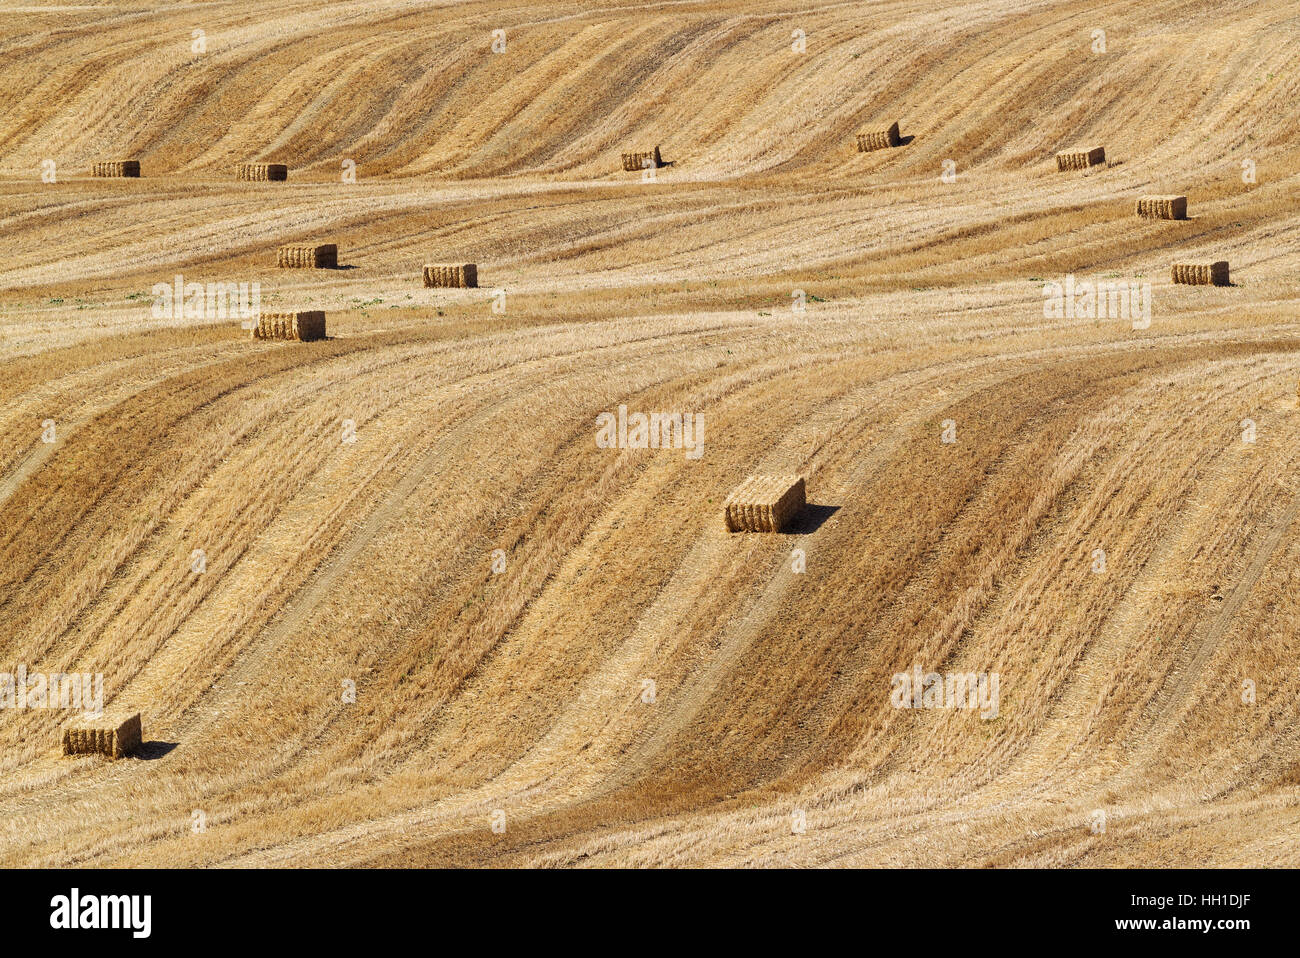 Bales of straw and abstract patterns in cornfield after wheat harvest, Cordoba province, Andalusia, Spain Stock Photo